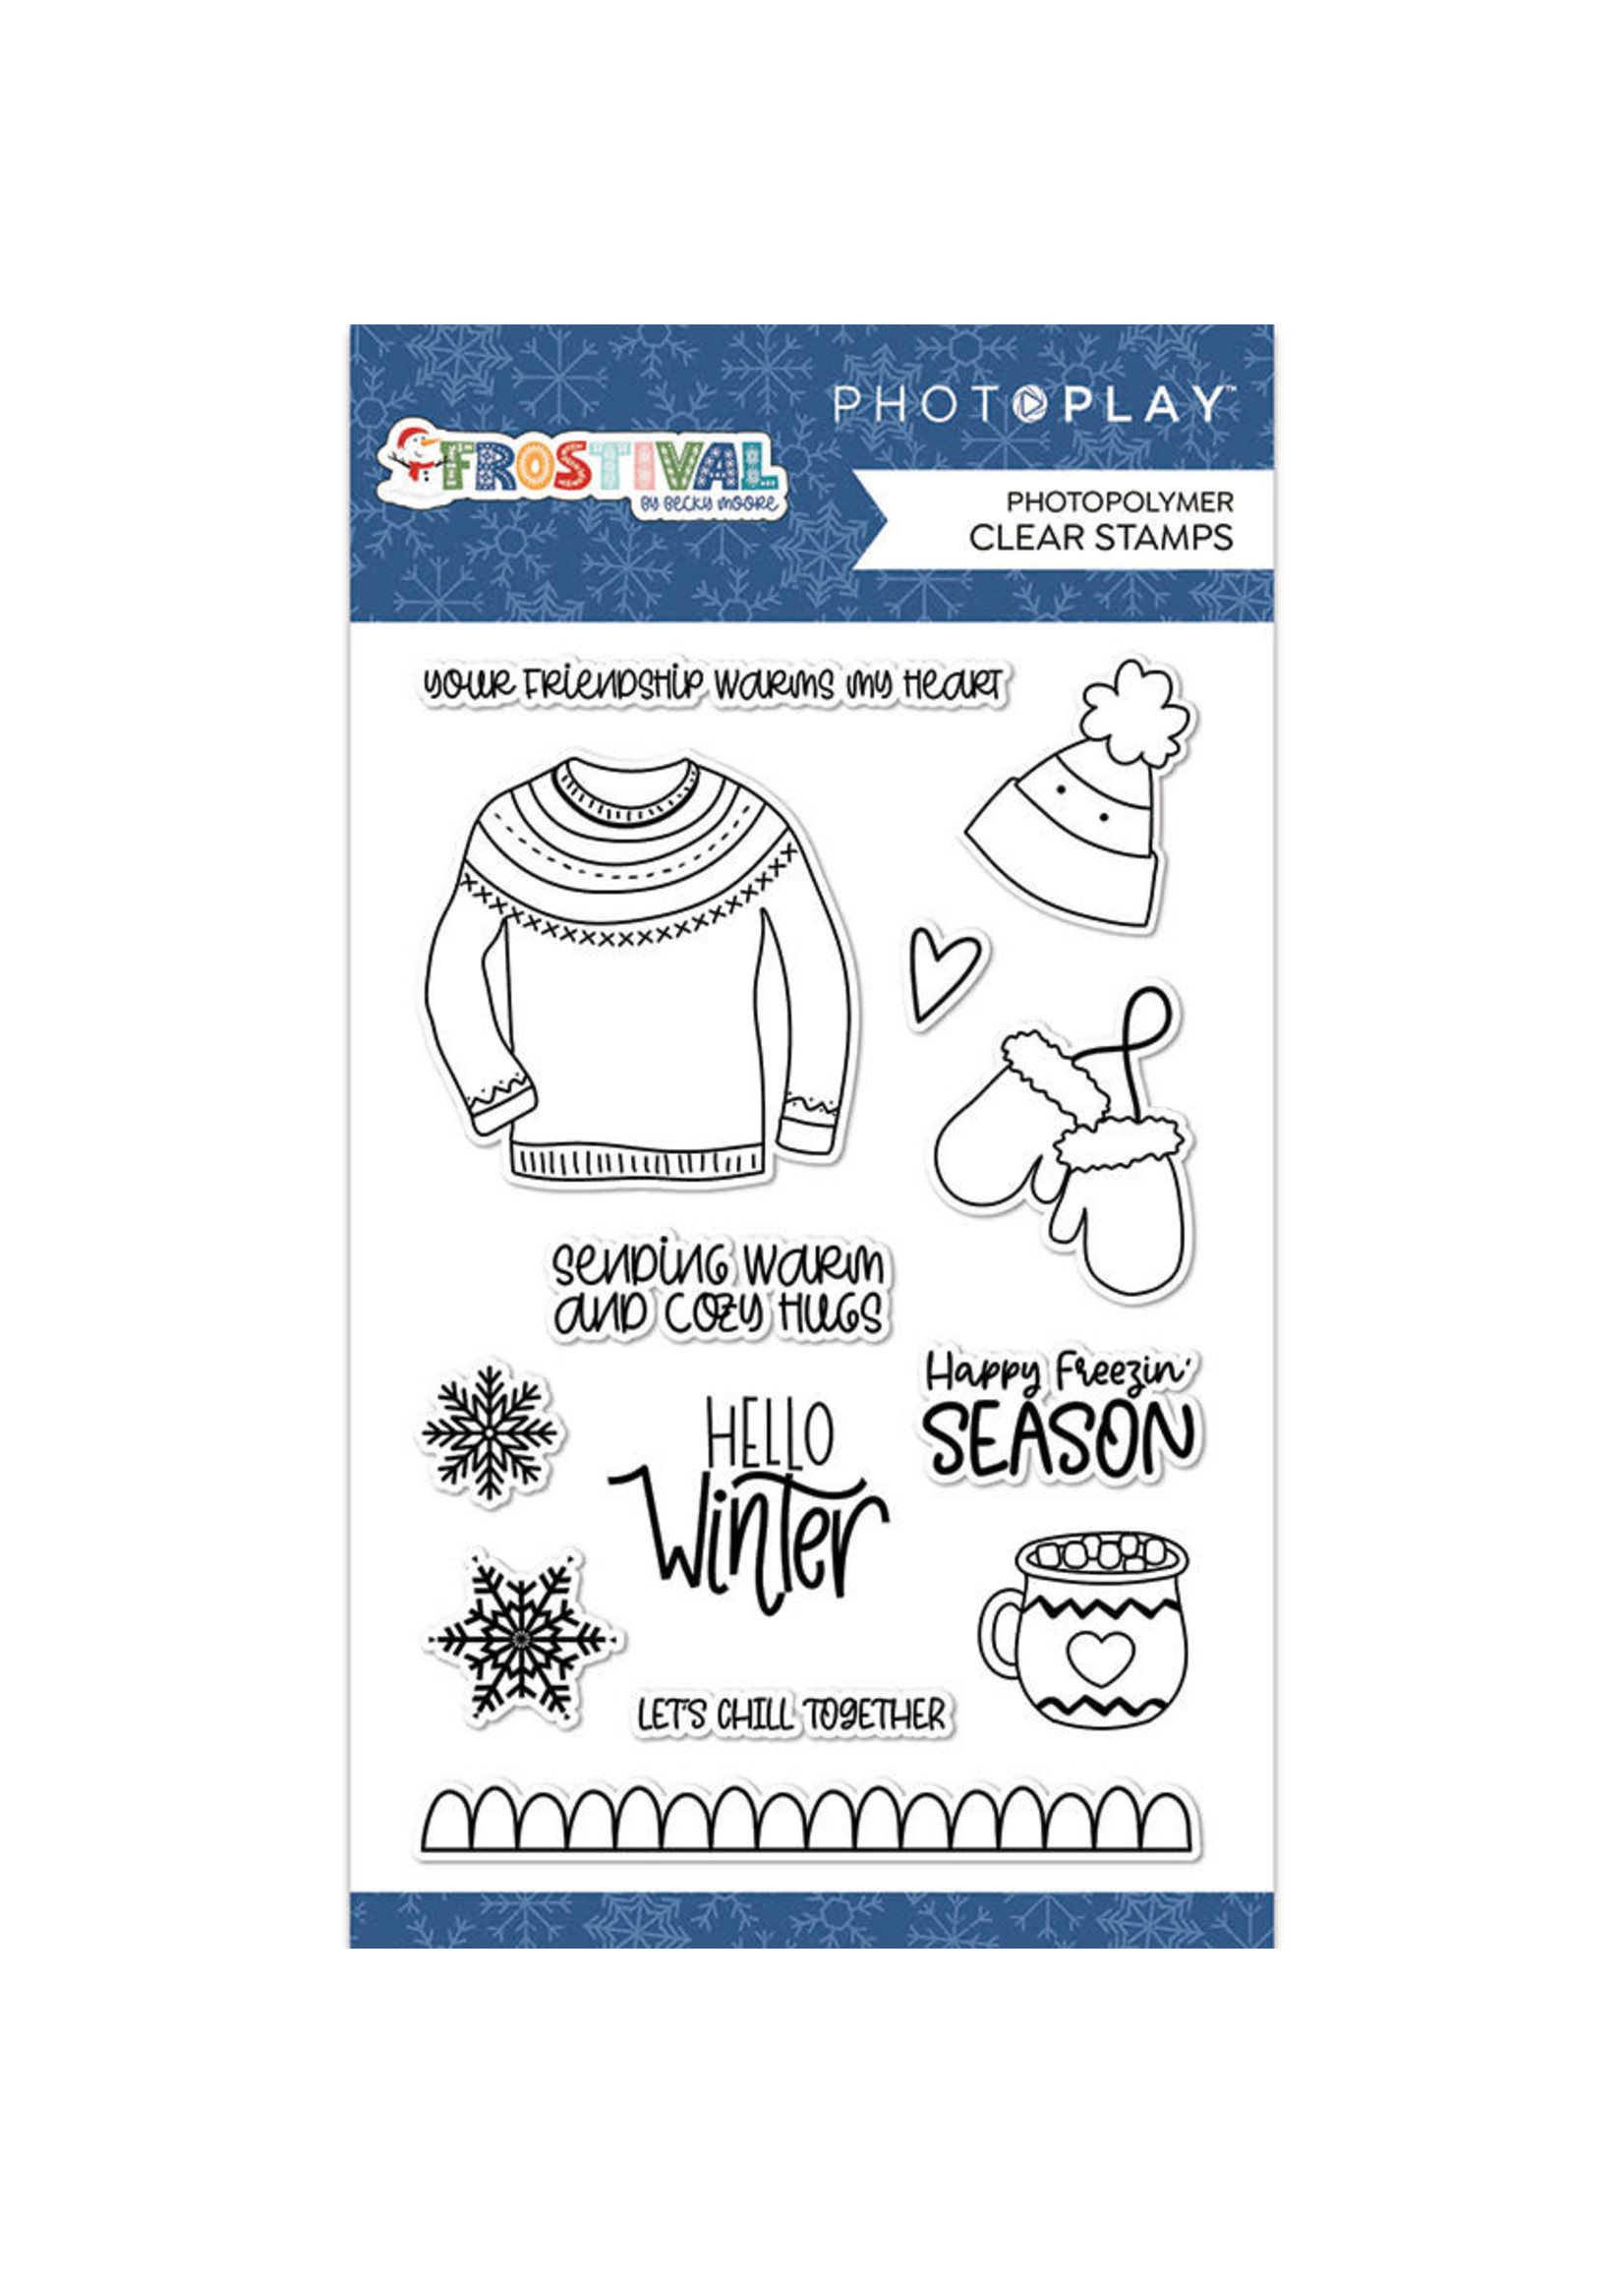 Photoplay Frostival - 4"x6" Stamp Set